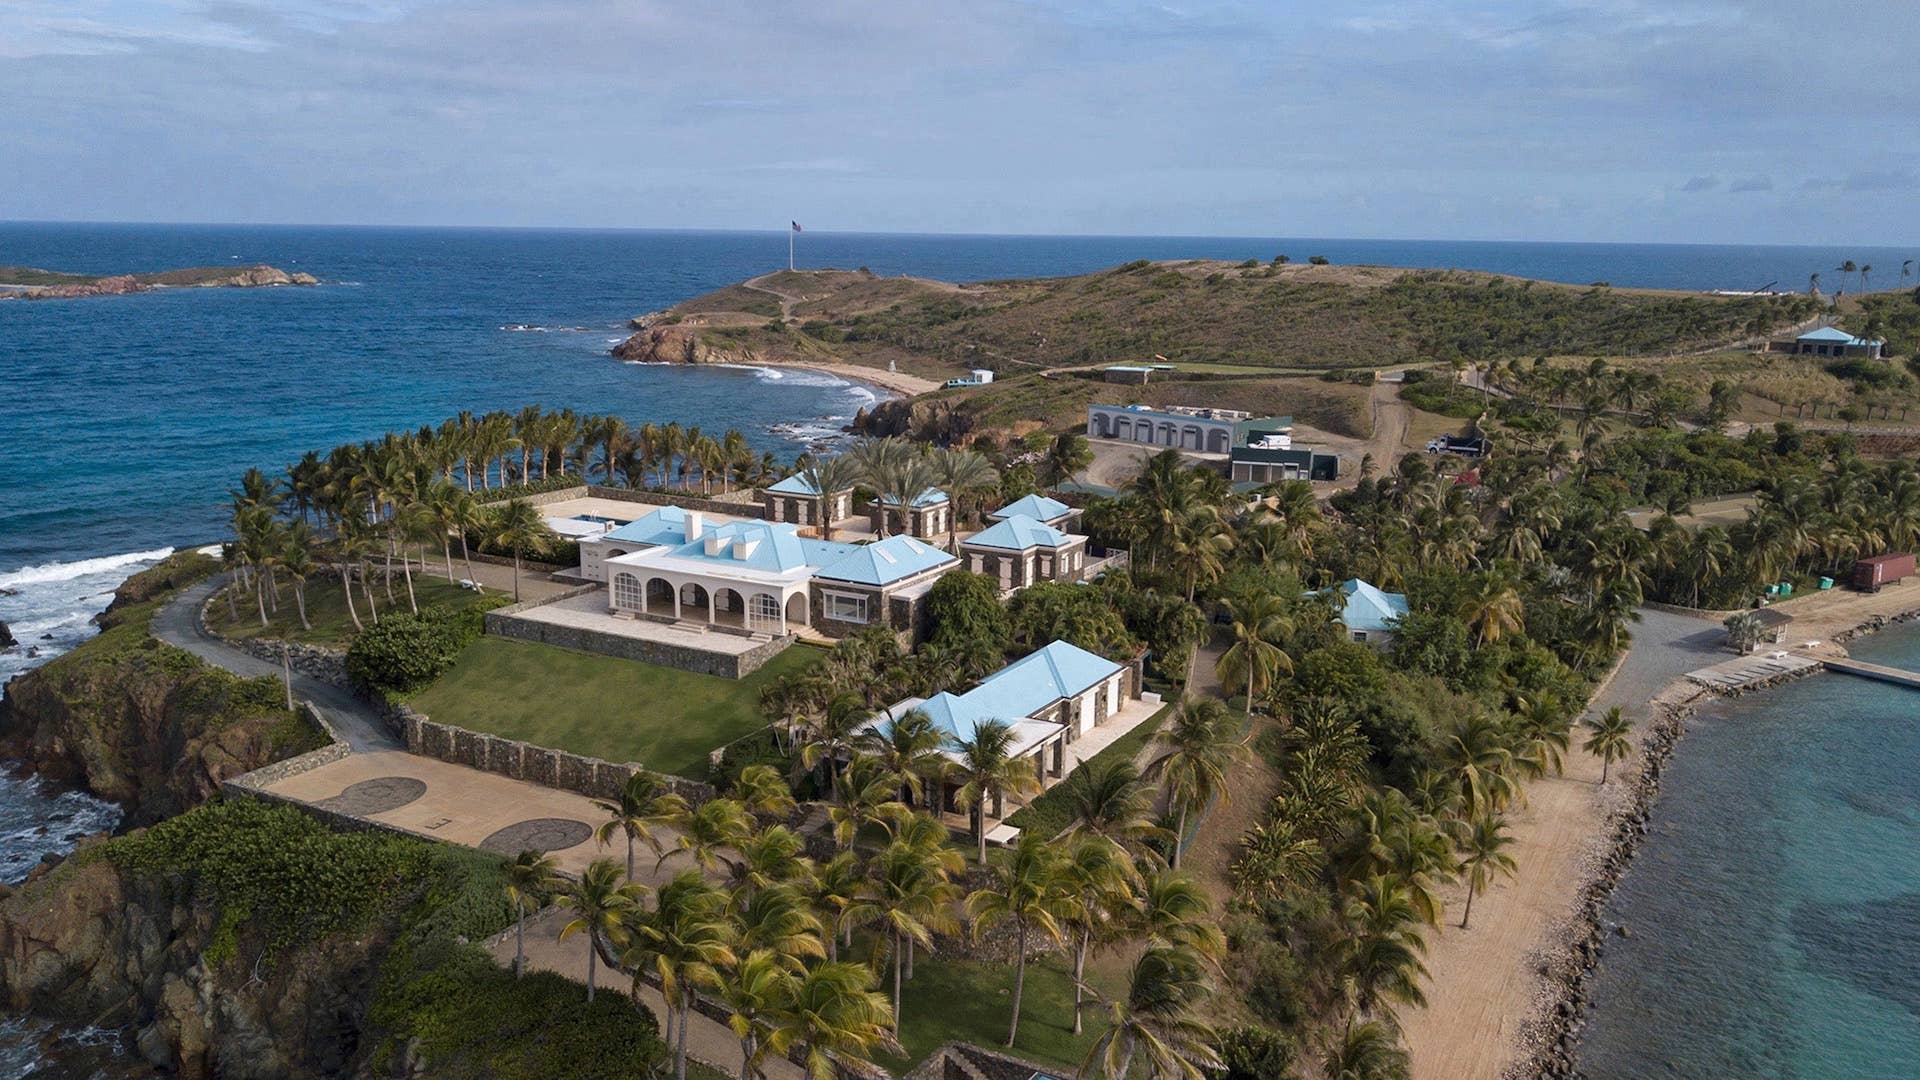 Jeffrey Epstein's former home on the island of Little St. James in the U.S. Virgin Islands